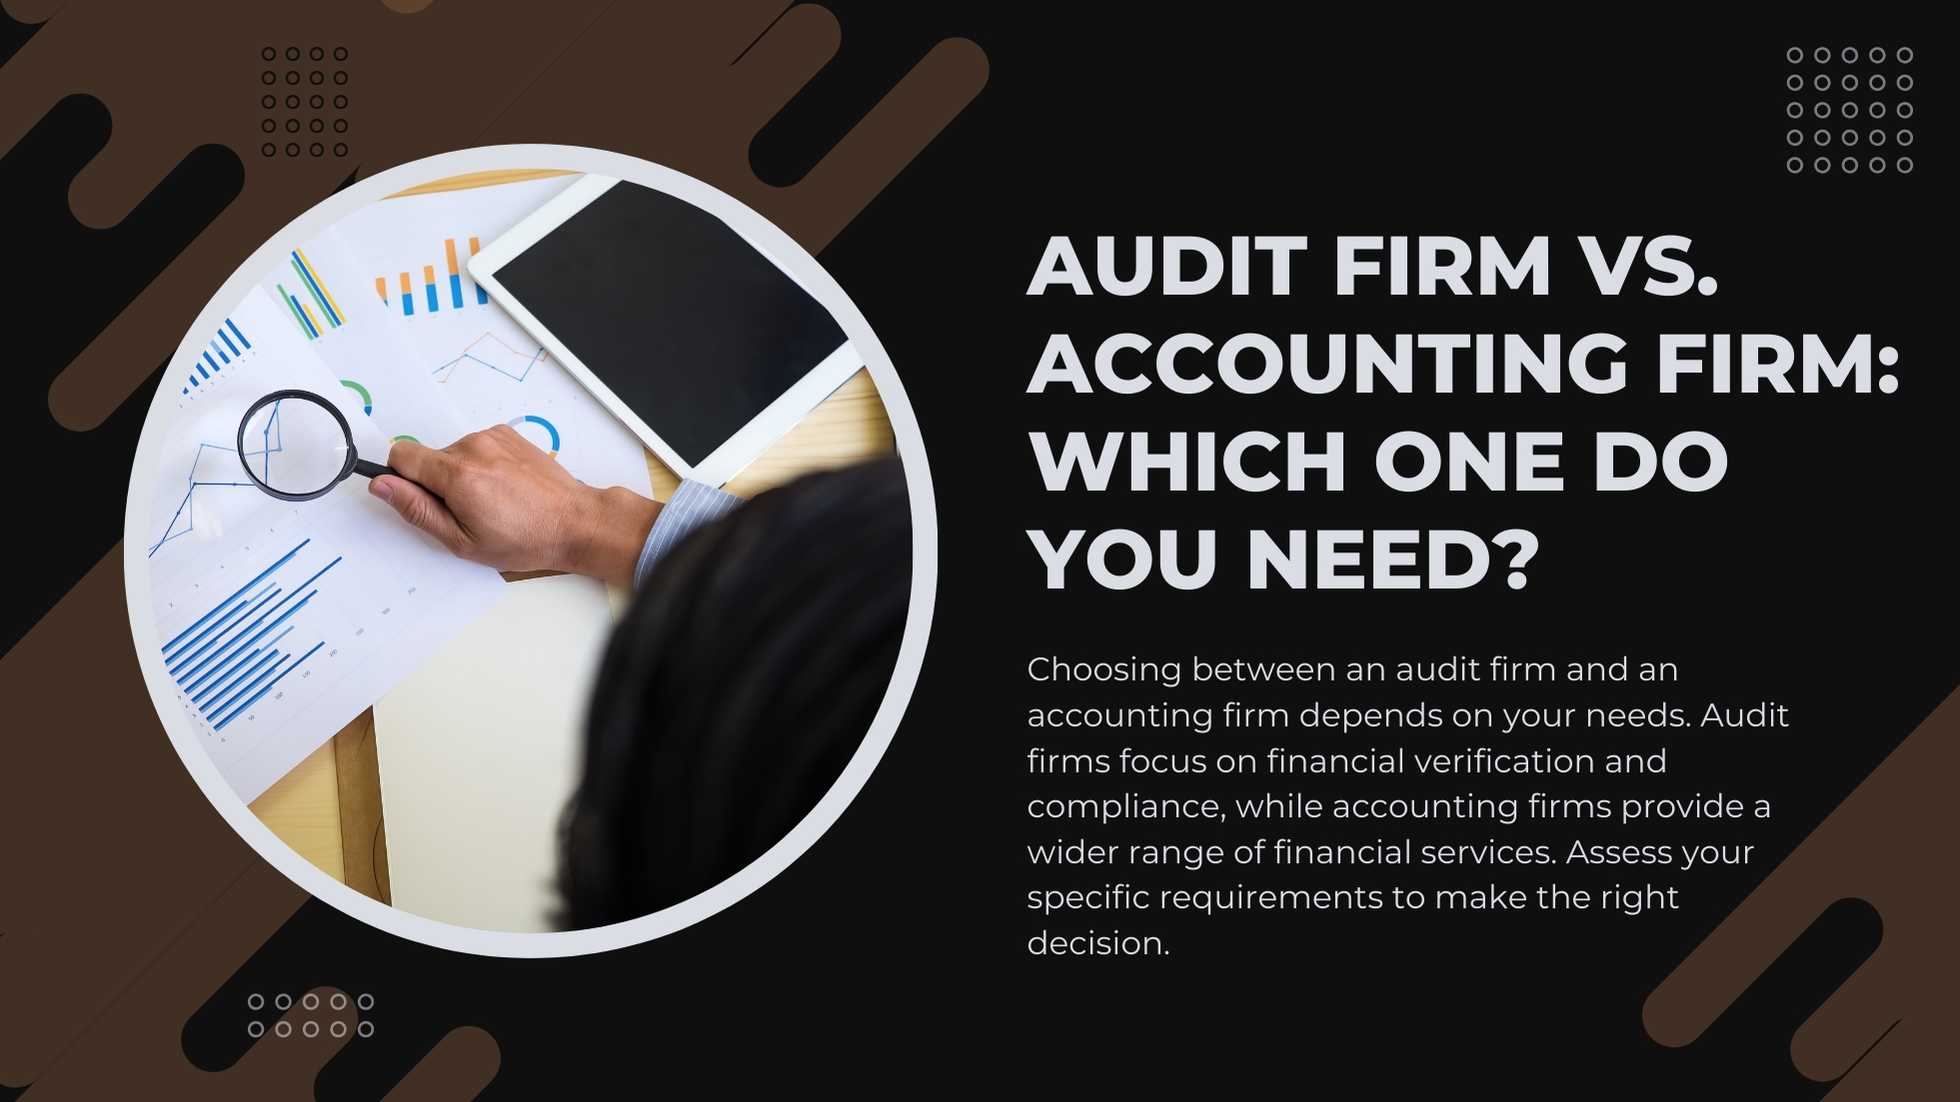 Audit Firm vs. Accounting Firm: Which One Do You Need?